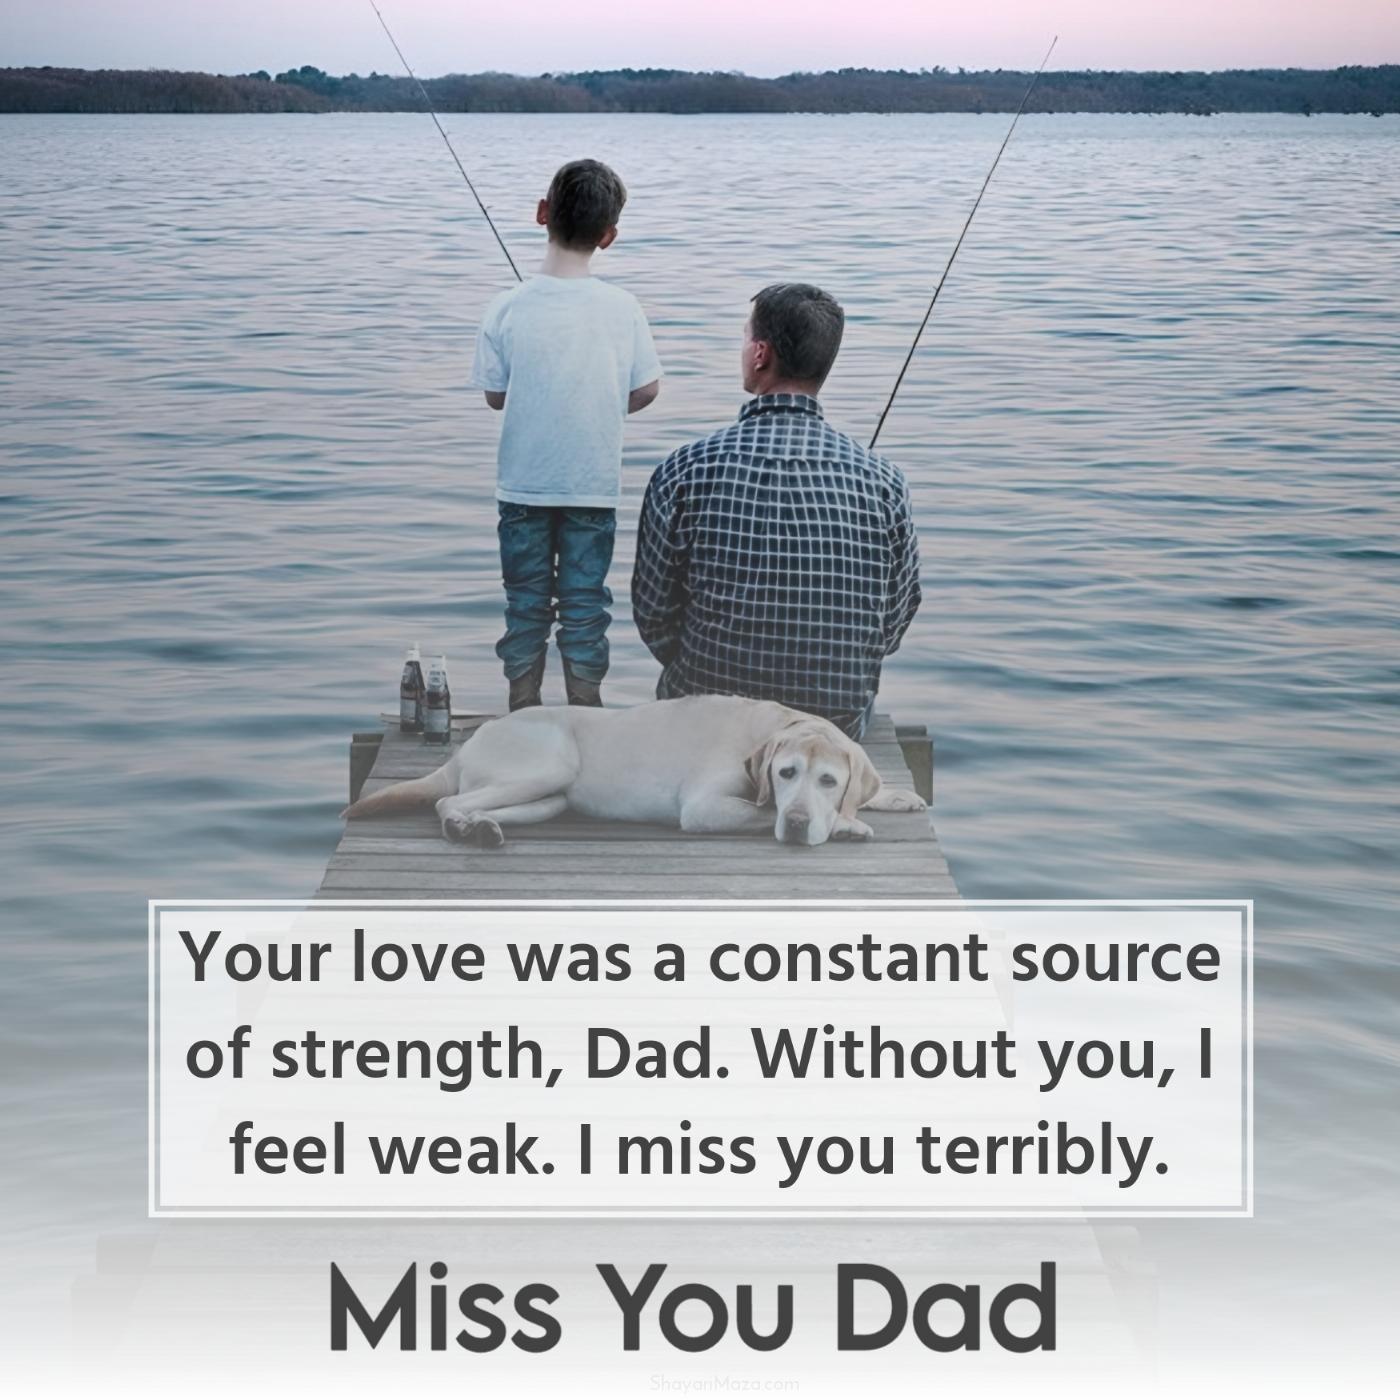 Your love was a constant source of strength Dad